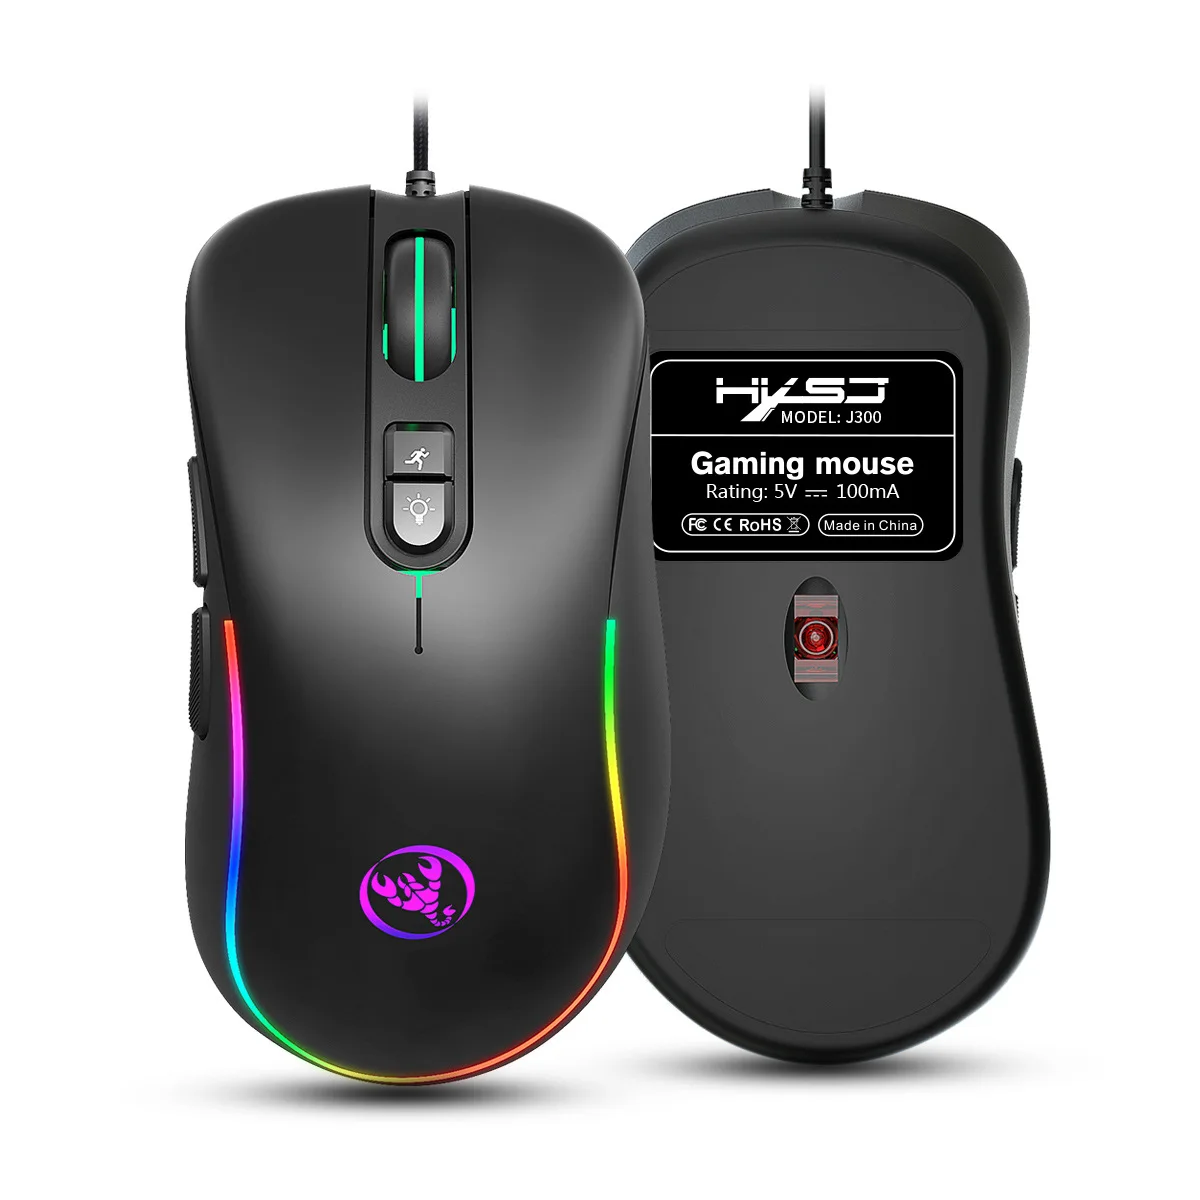 

6 RGB Programmable Gaming Mouse for PC Gamer, Mini Optical USB Wired Computer Mouse 6400 DPI